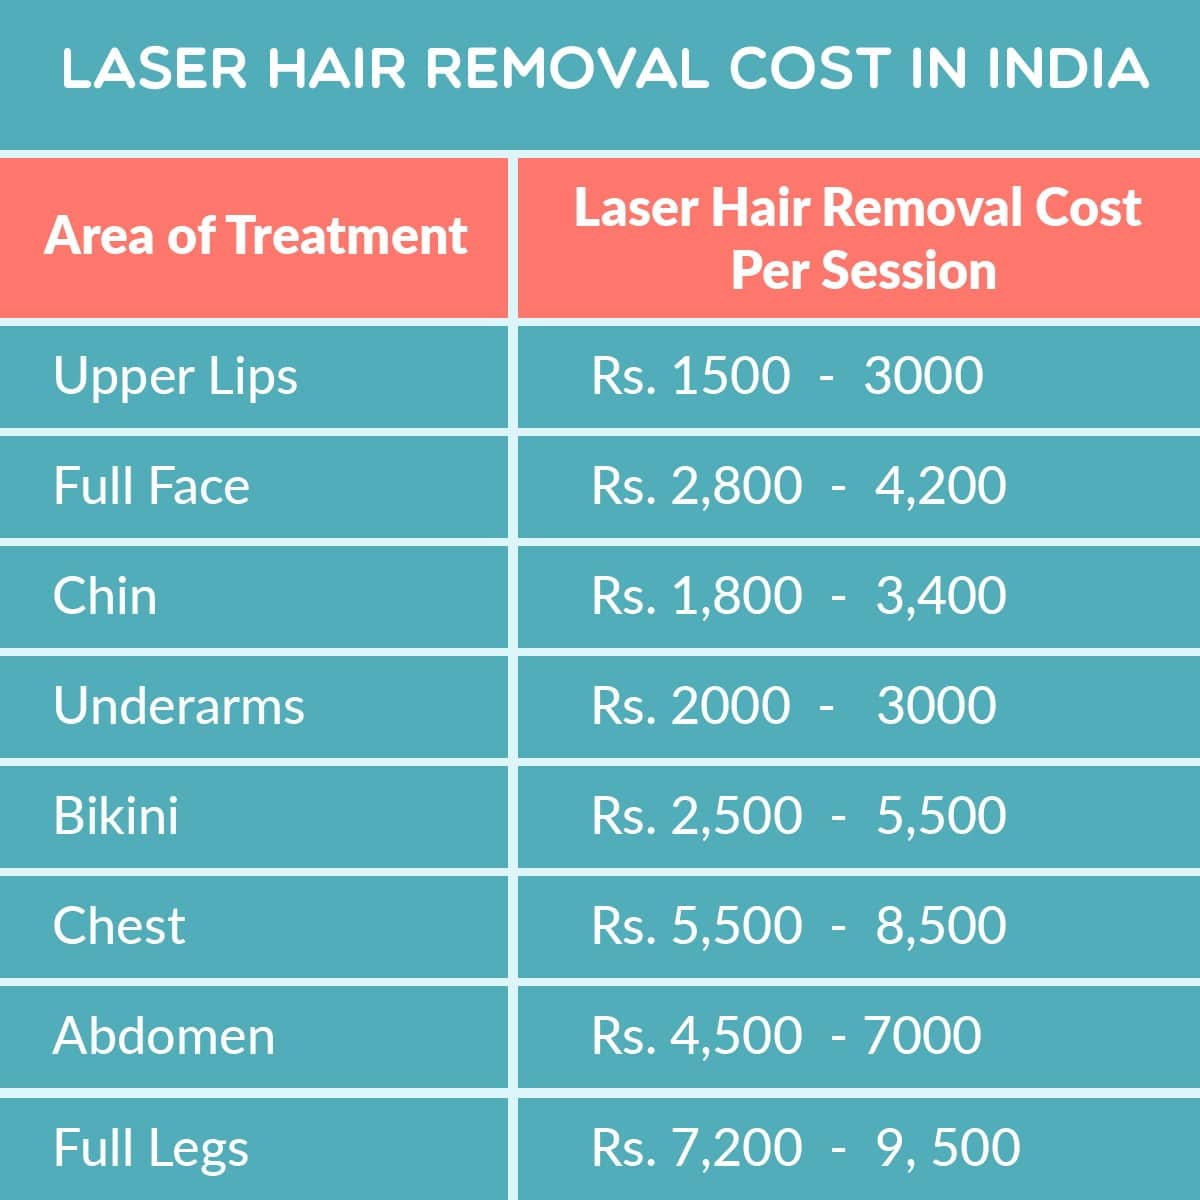 laser hair removal cost in india - How Much Does Cost Of Laser Hair Removal In India?